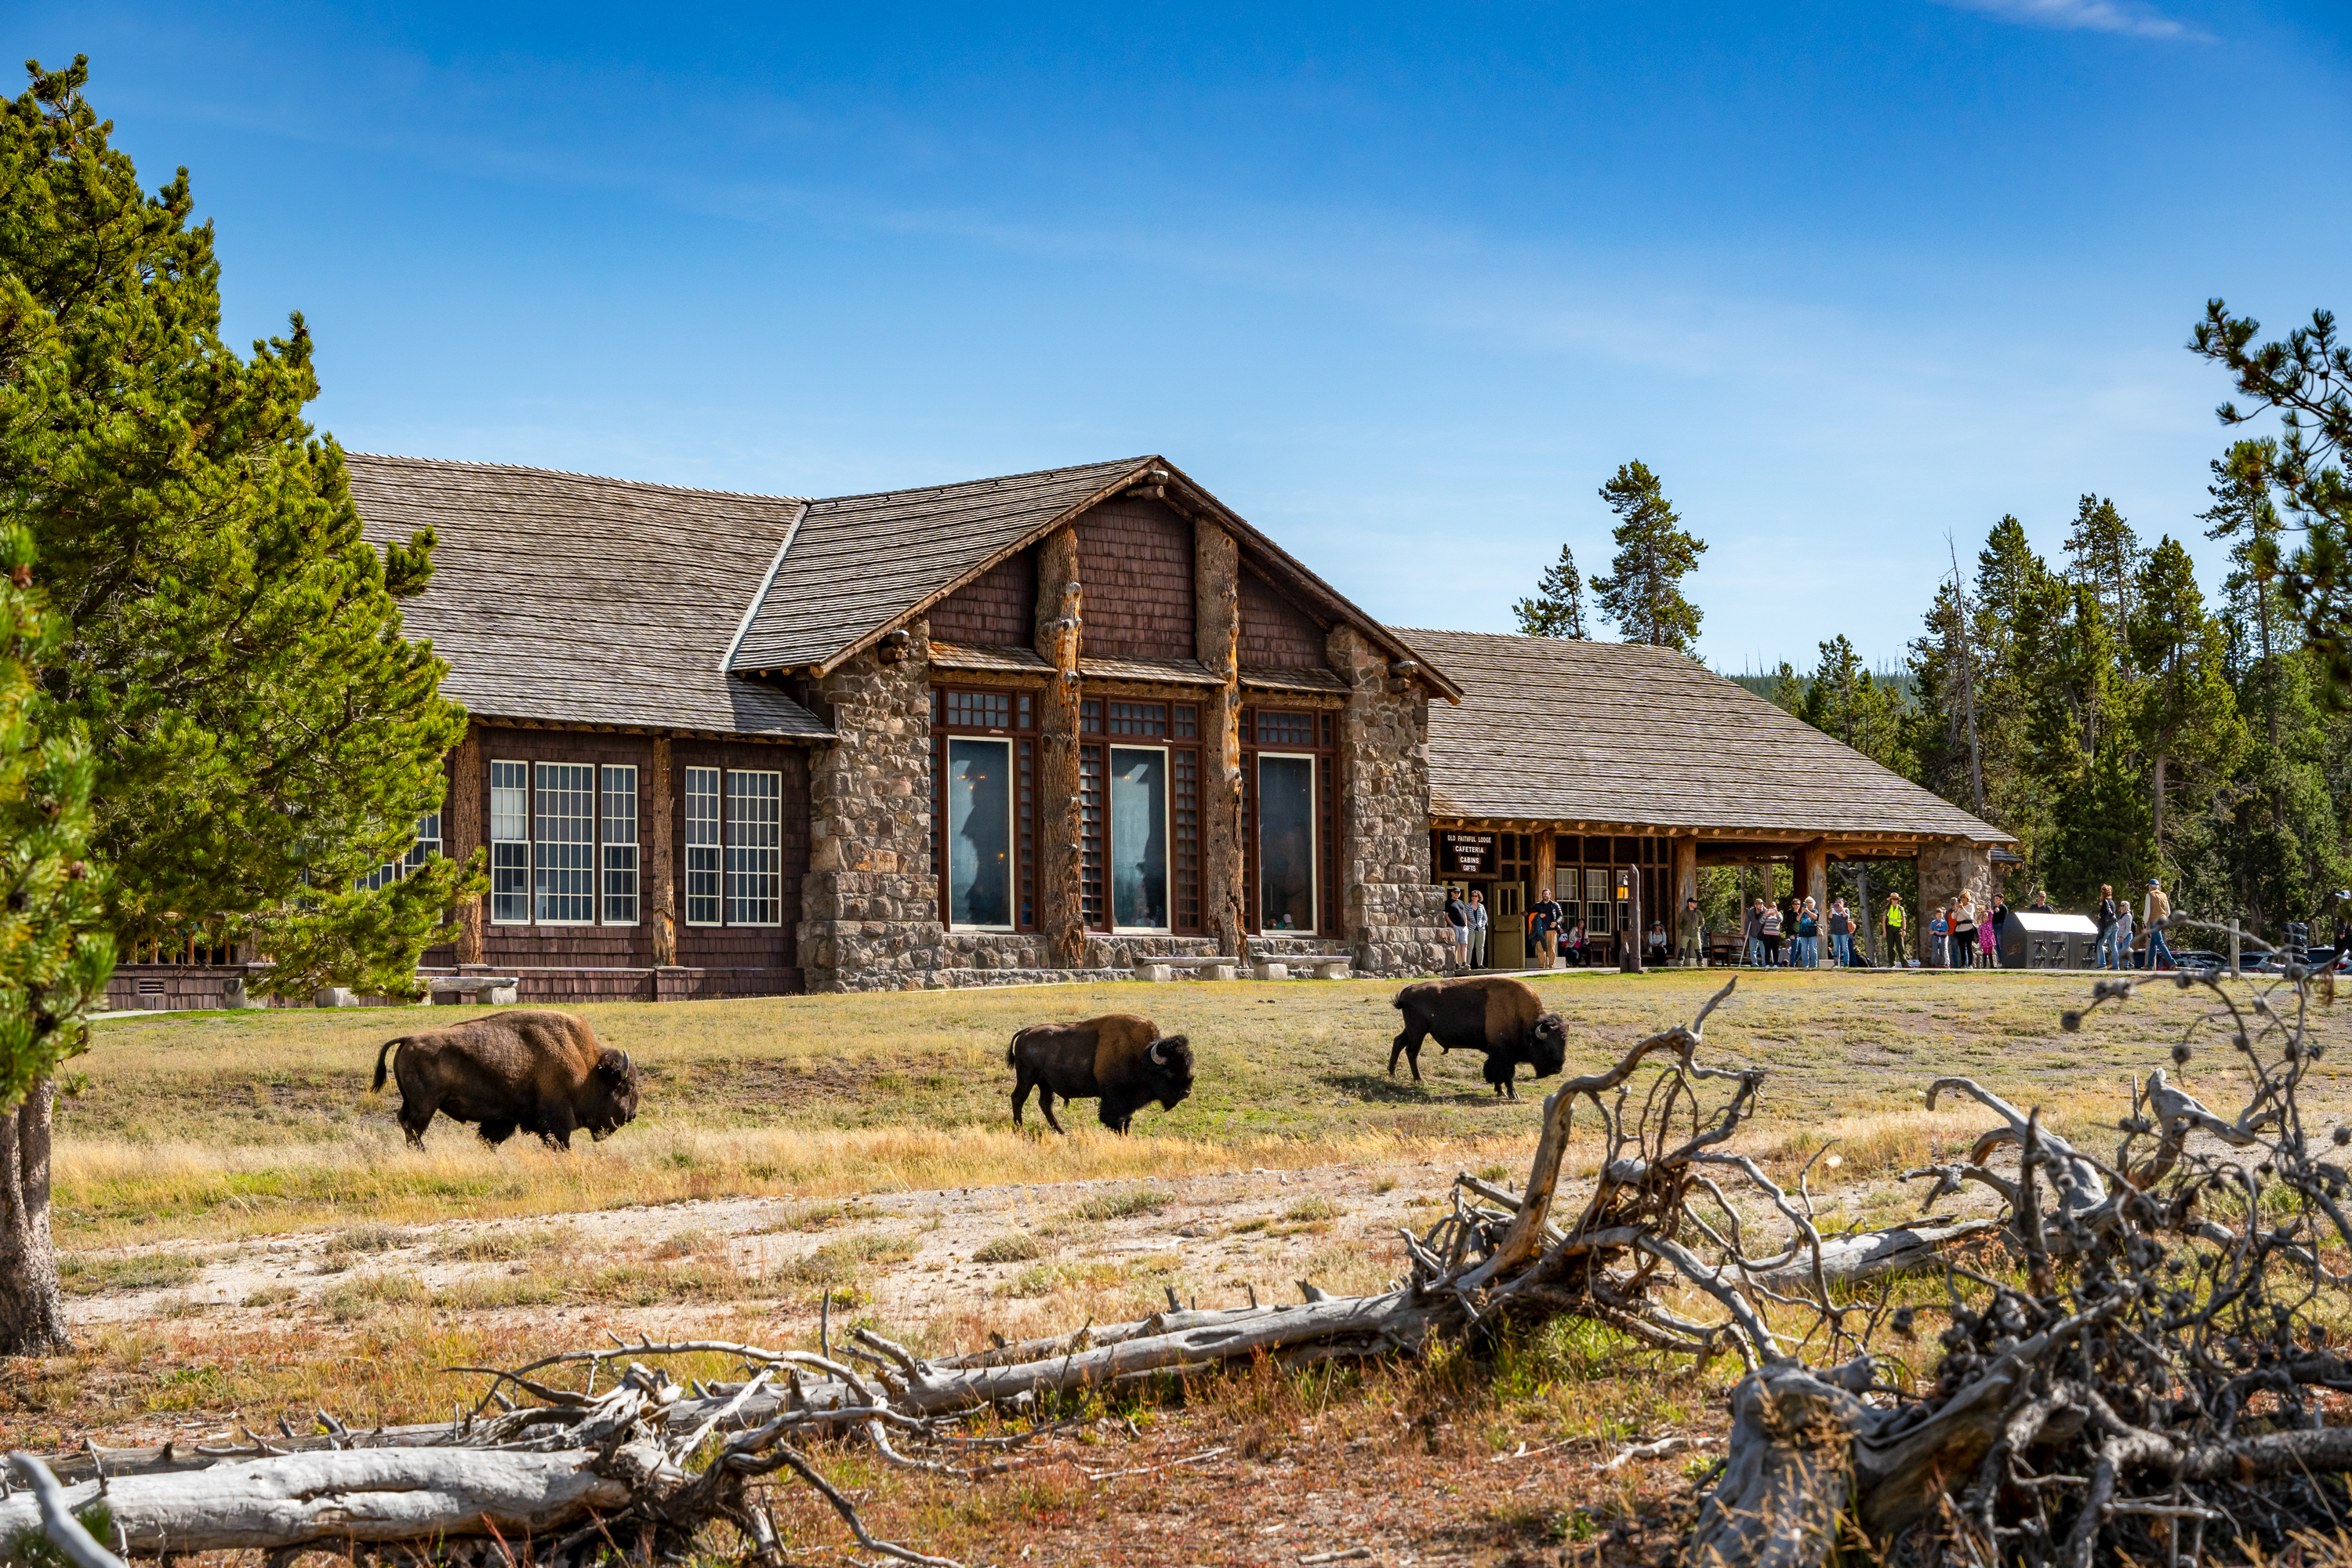 Finding the Best Rates in Yellowstone: Do's and Don'ts